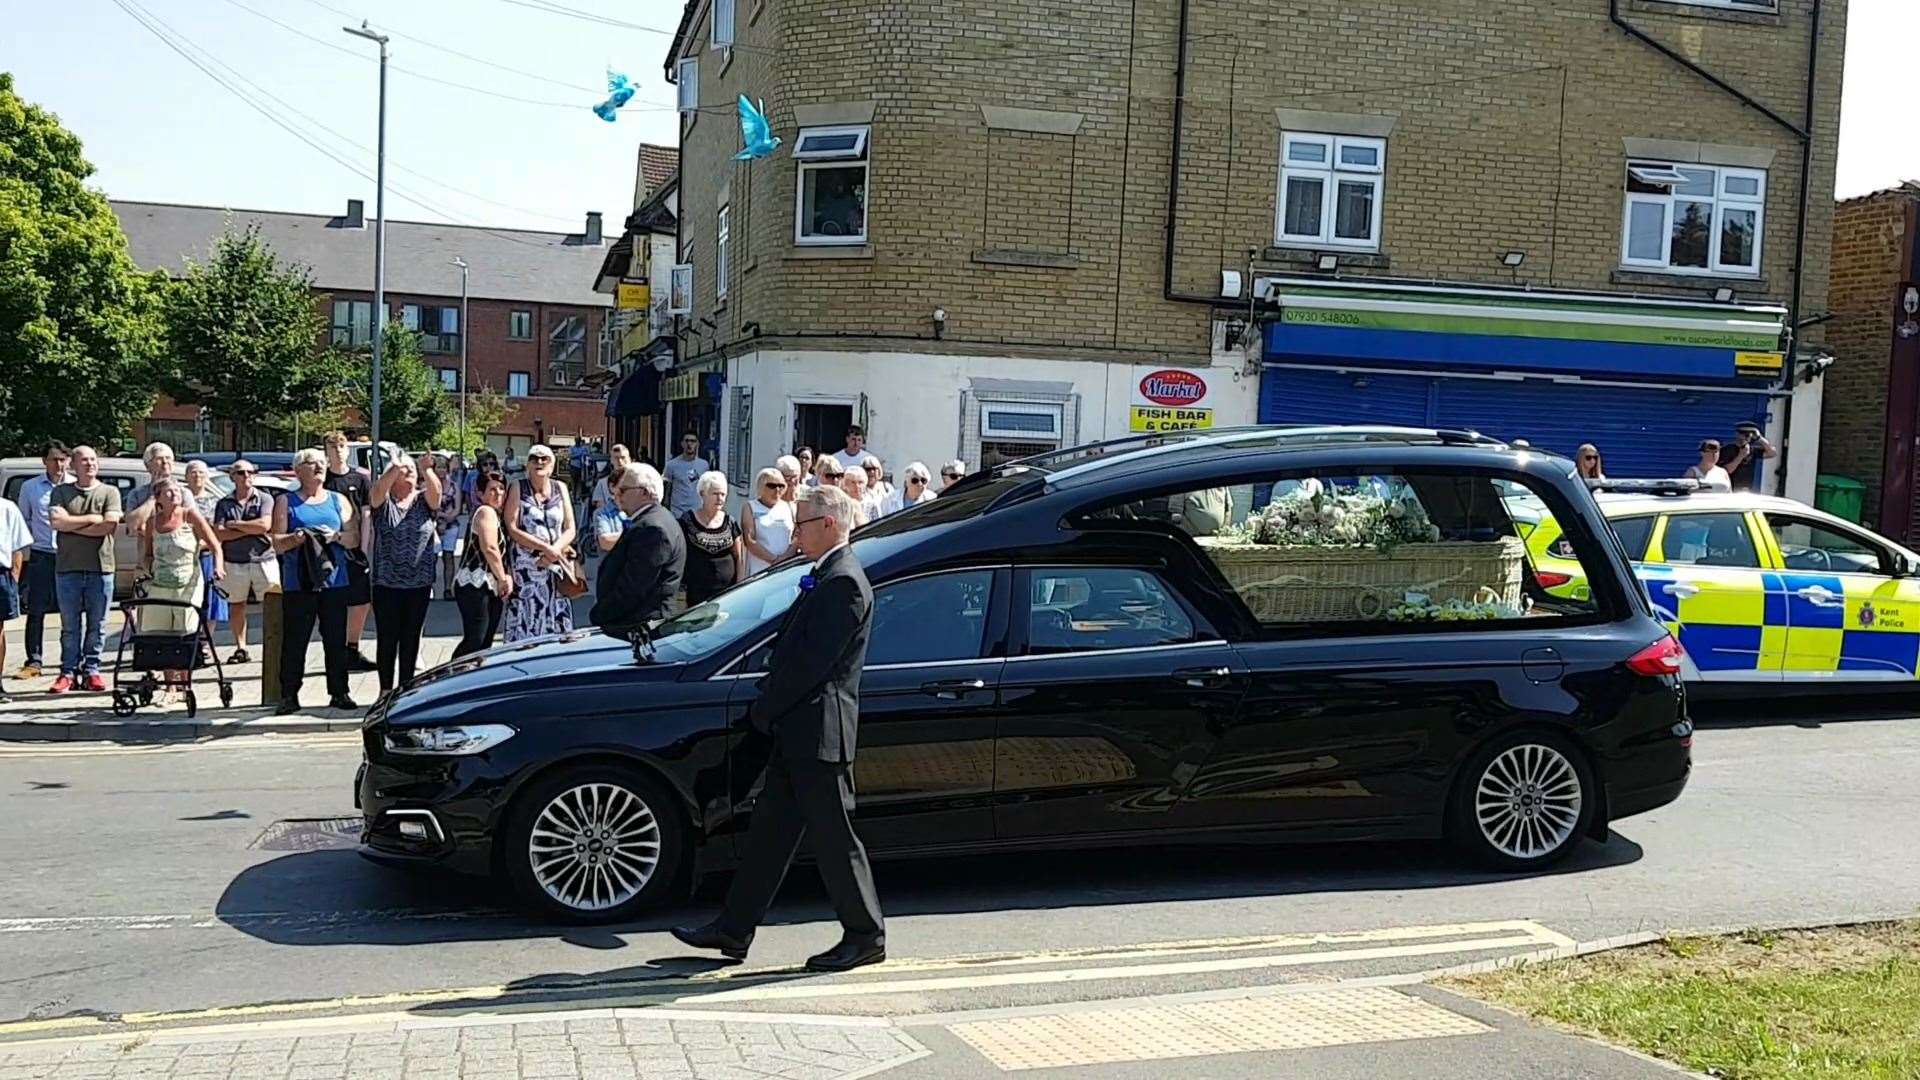 Hundreds of people came out to pay their respects to Julia James as her funeral cortège passed through Aylesham